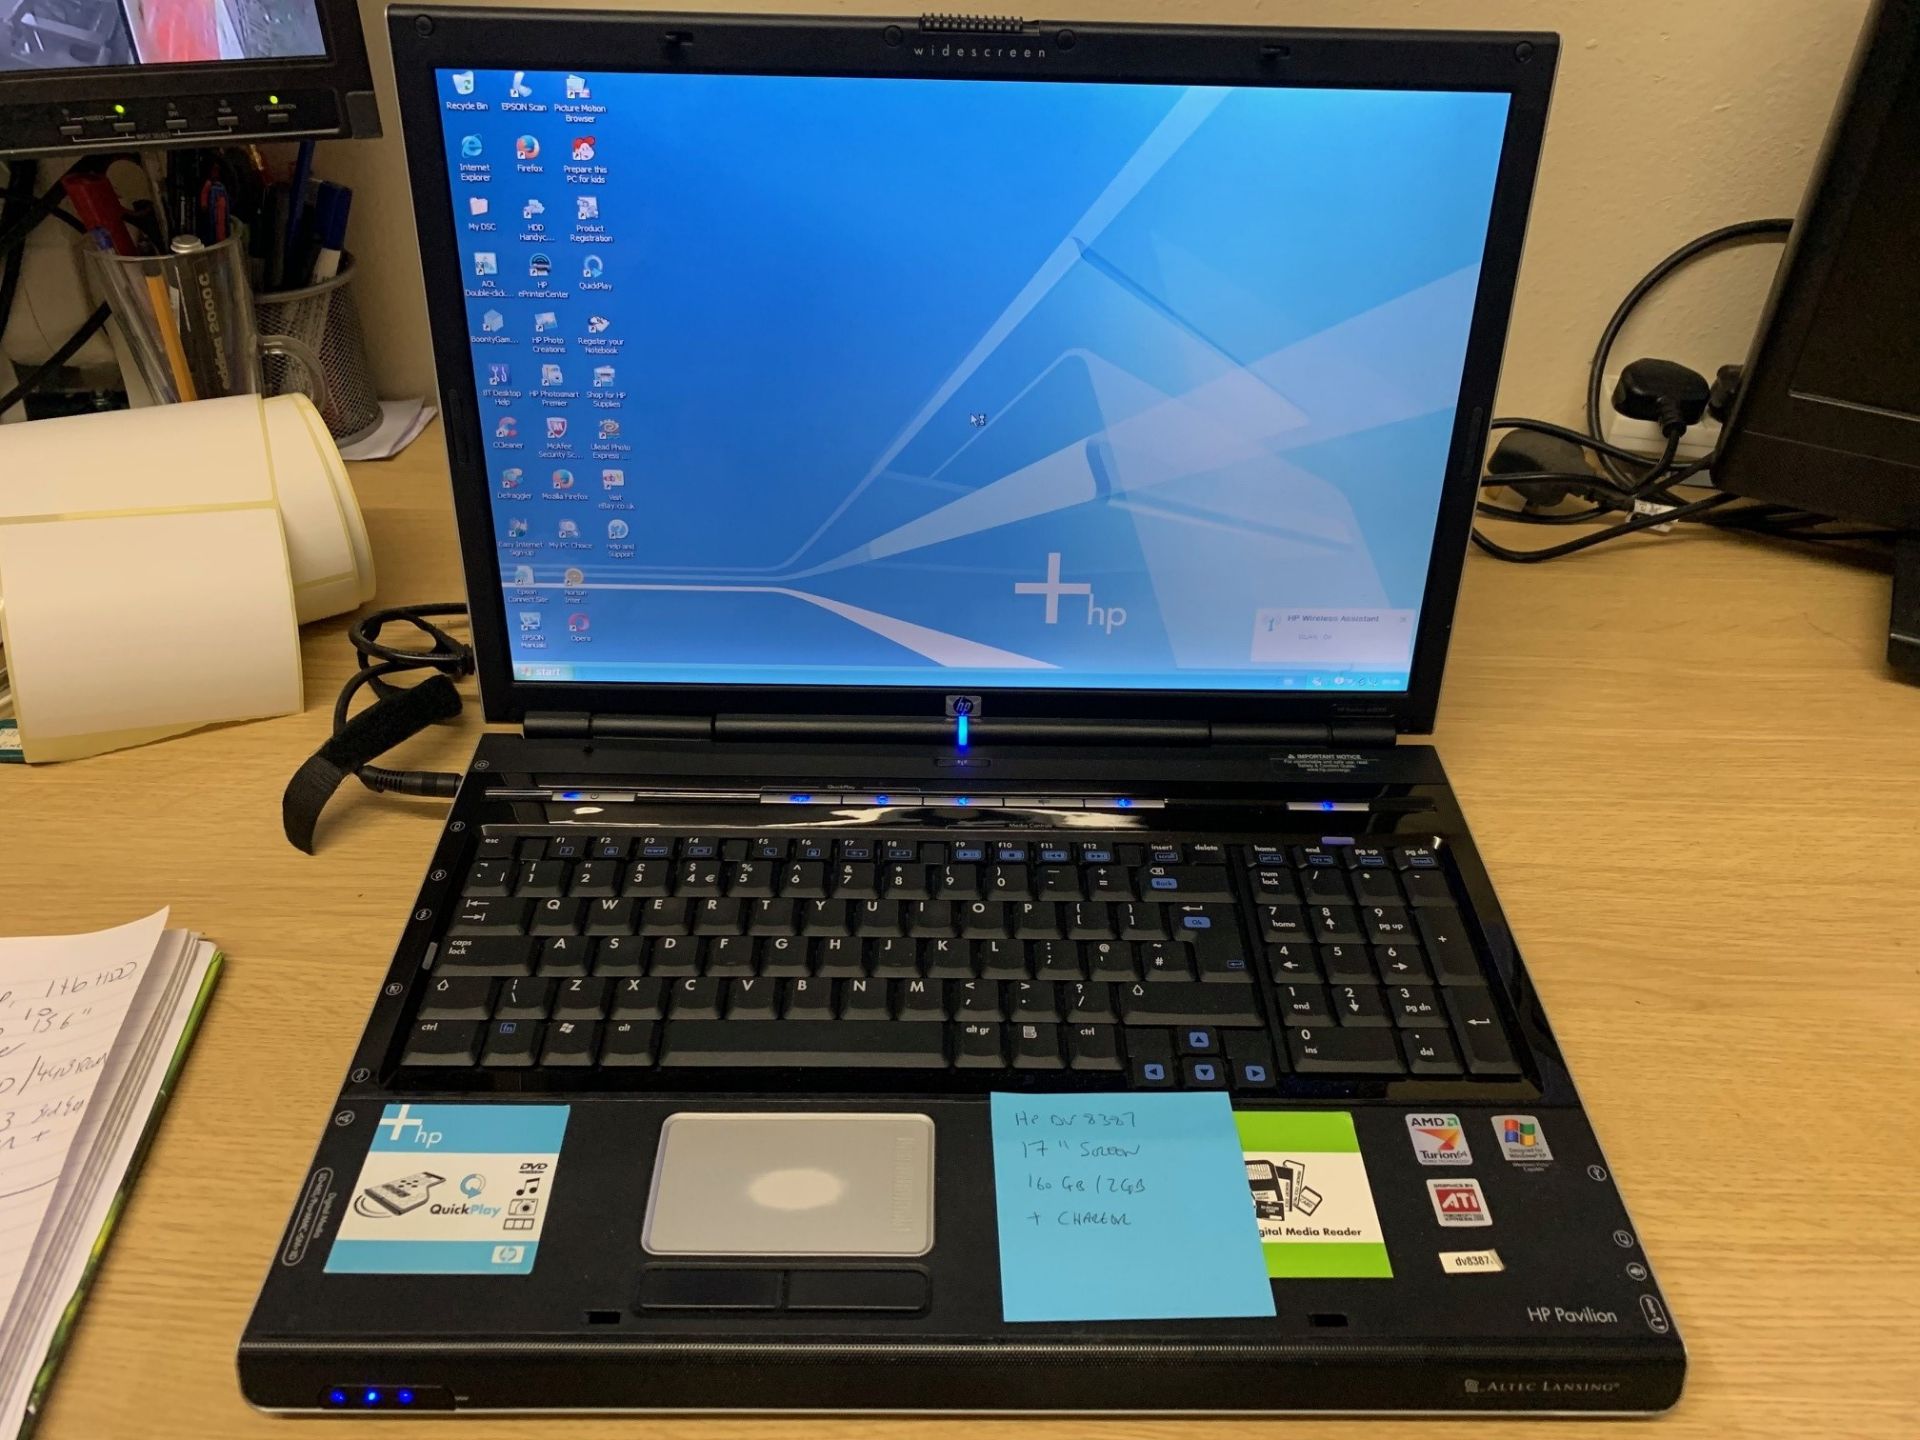 HP DV8387 Laptop - 160GB Hard Drive, 2GB RAM, 17" Screen, Loaded With Windows XP & Complete With